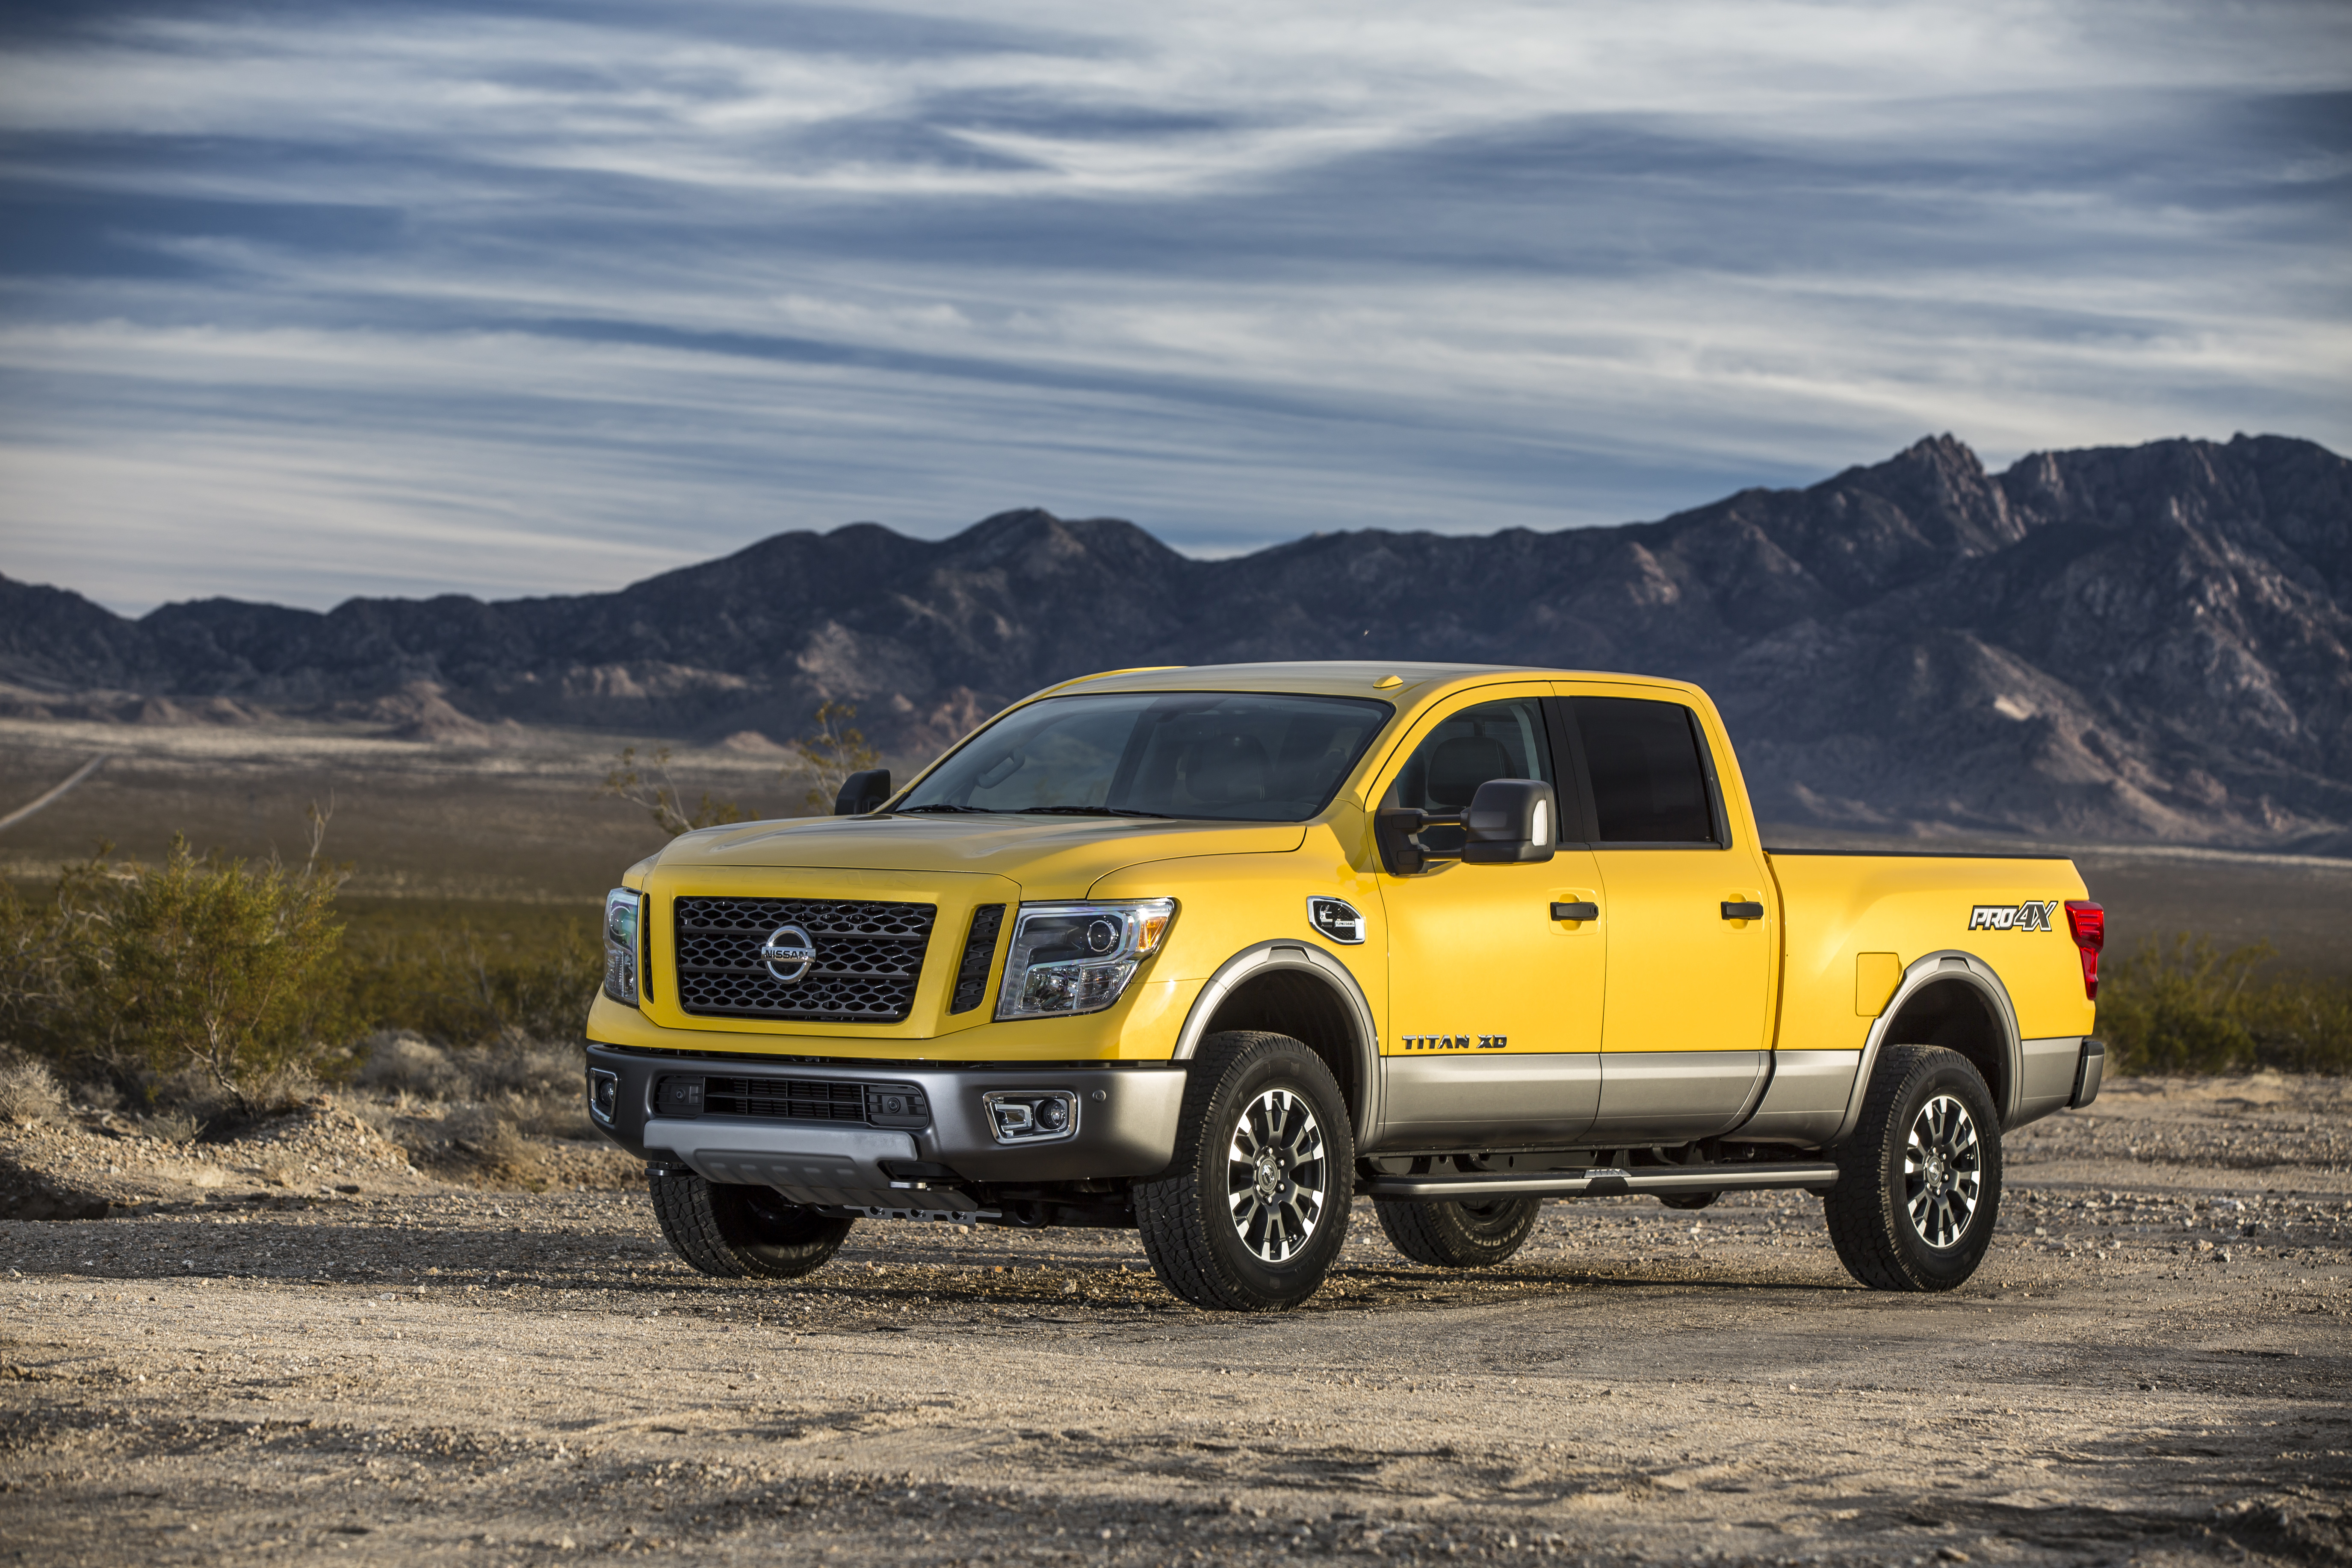 More than just a new model, the 2016 Nissan TITAN XD creates a "new class" of pickup that stakes out a unique position in the segment between traditional heavy-duty and light-duty entries. The bold new design combines the capability of a heavy-duty hauler with the drivability and affordability of a light-duty pickup – and is anchored by a powerful Cummins® 5.0L V8 Turbo Diesel rated at 310 horsepower and a hefty 555 lb-ft of torque. It is mated to a heavy-duty 6-speed Aisin automatic transmission.